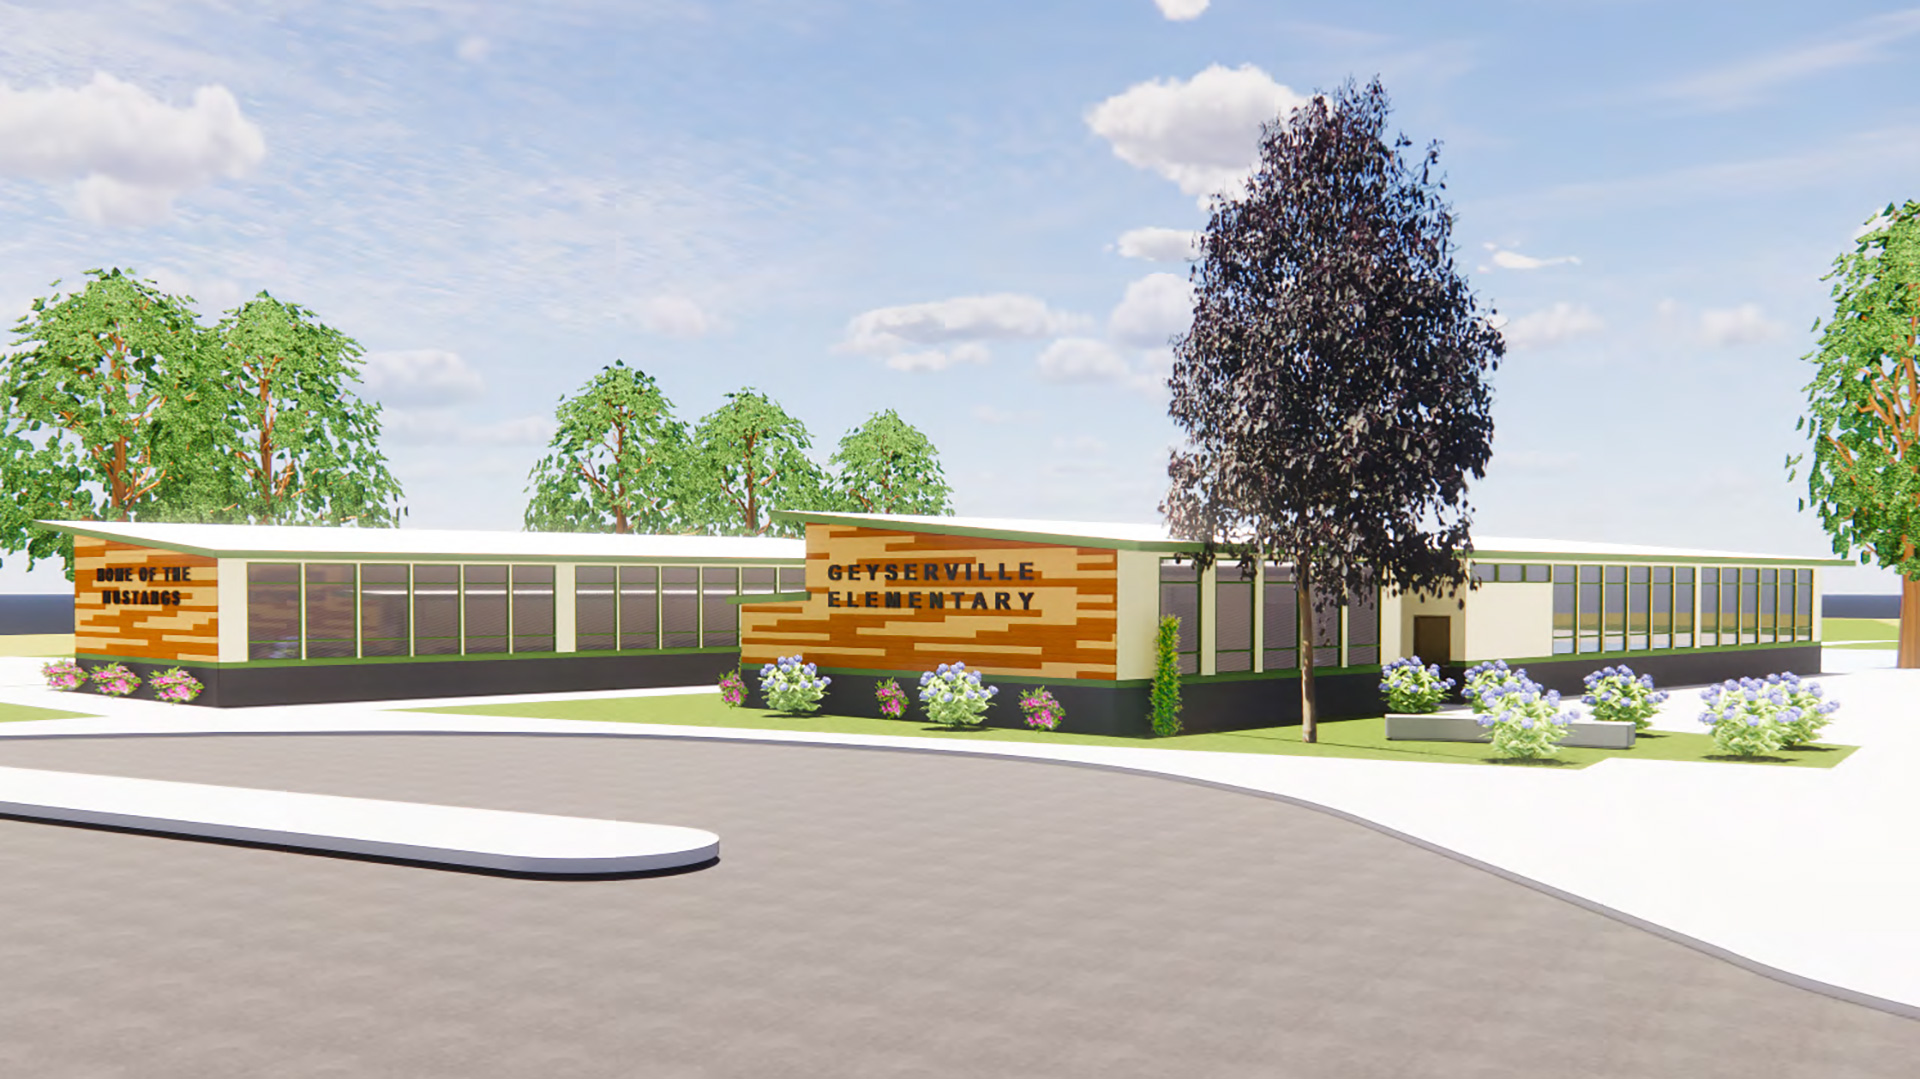 Rendering of school exterior showing tall classroom windows and asphalt pickup/dropoff area in front.